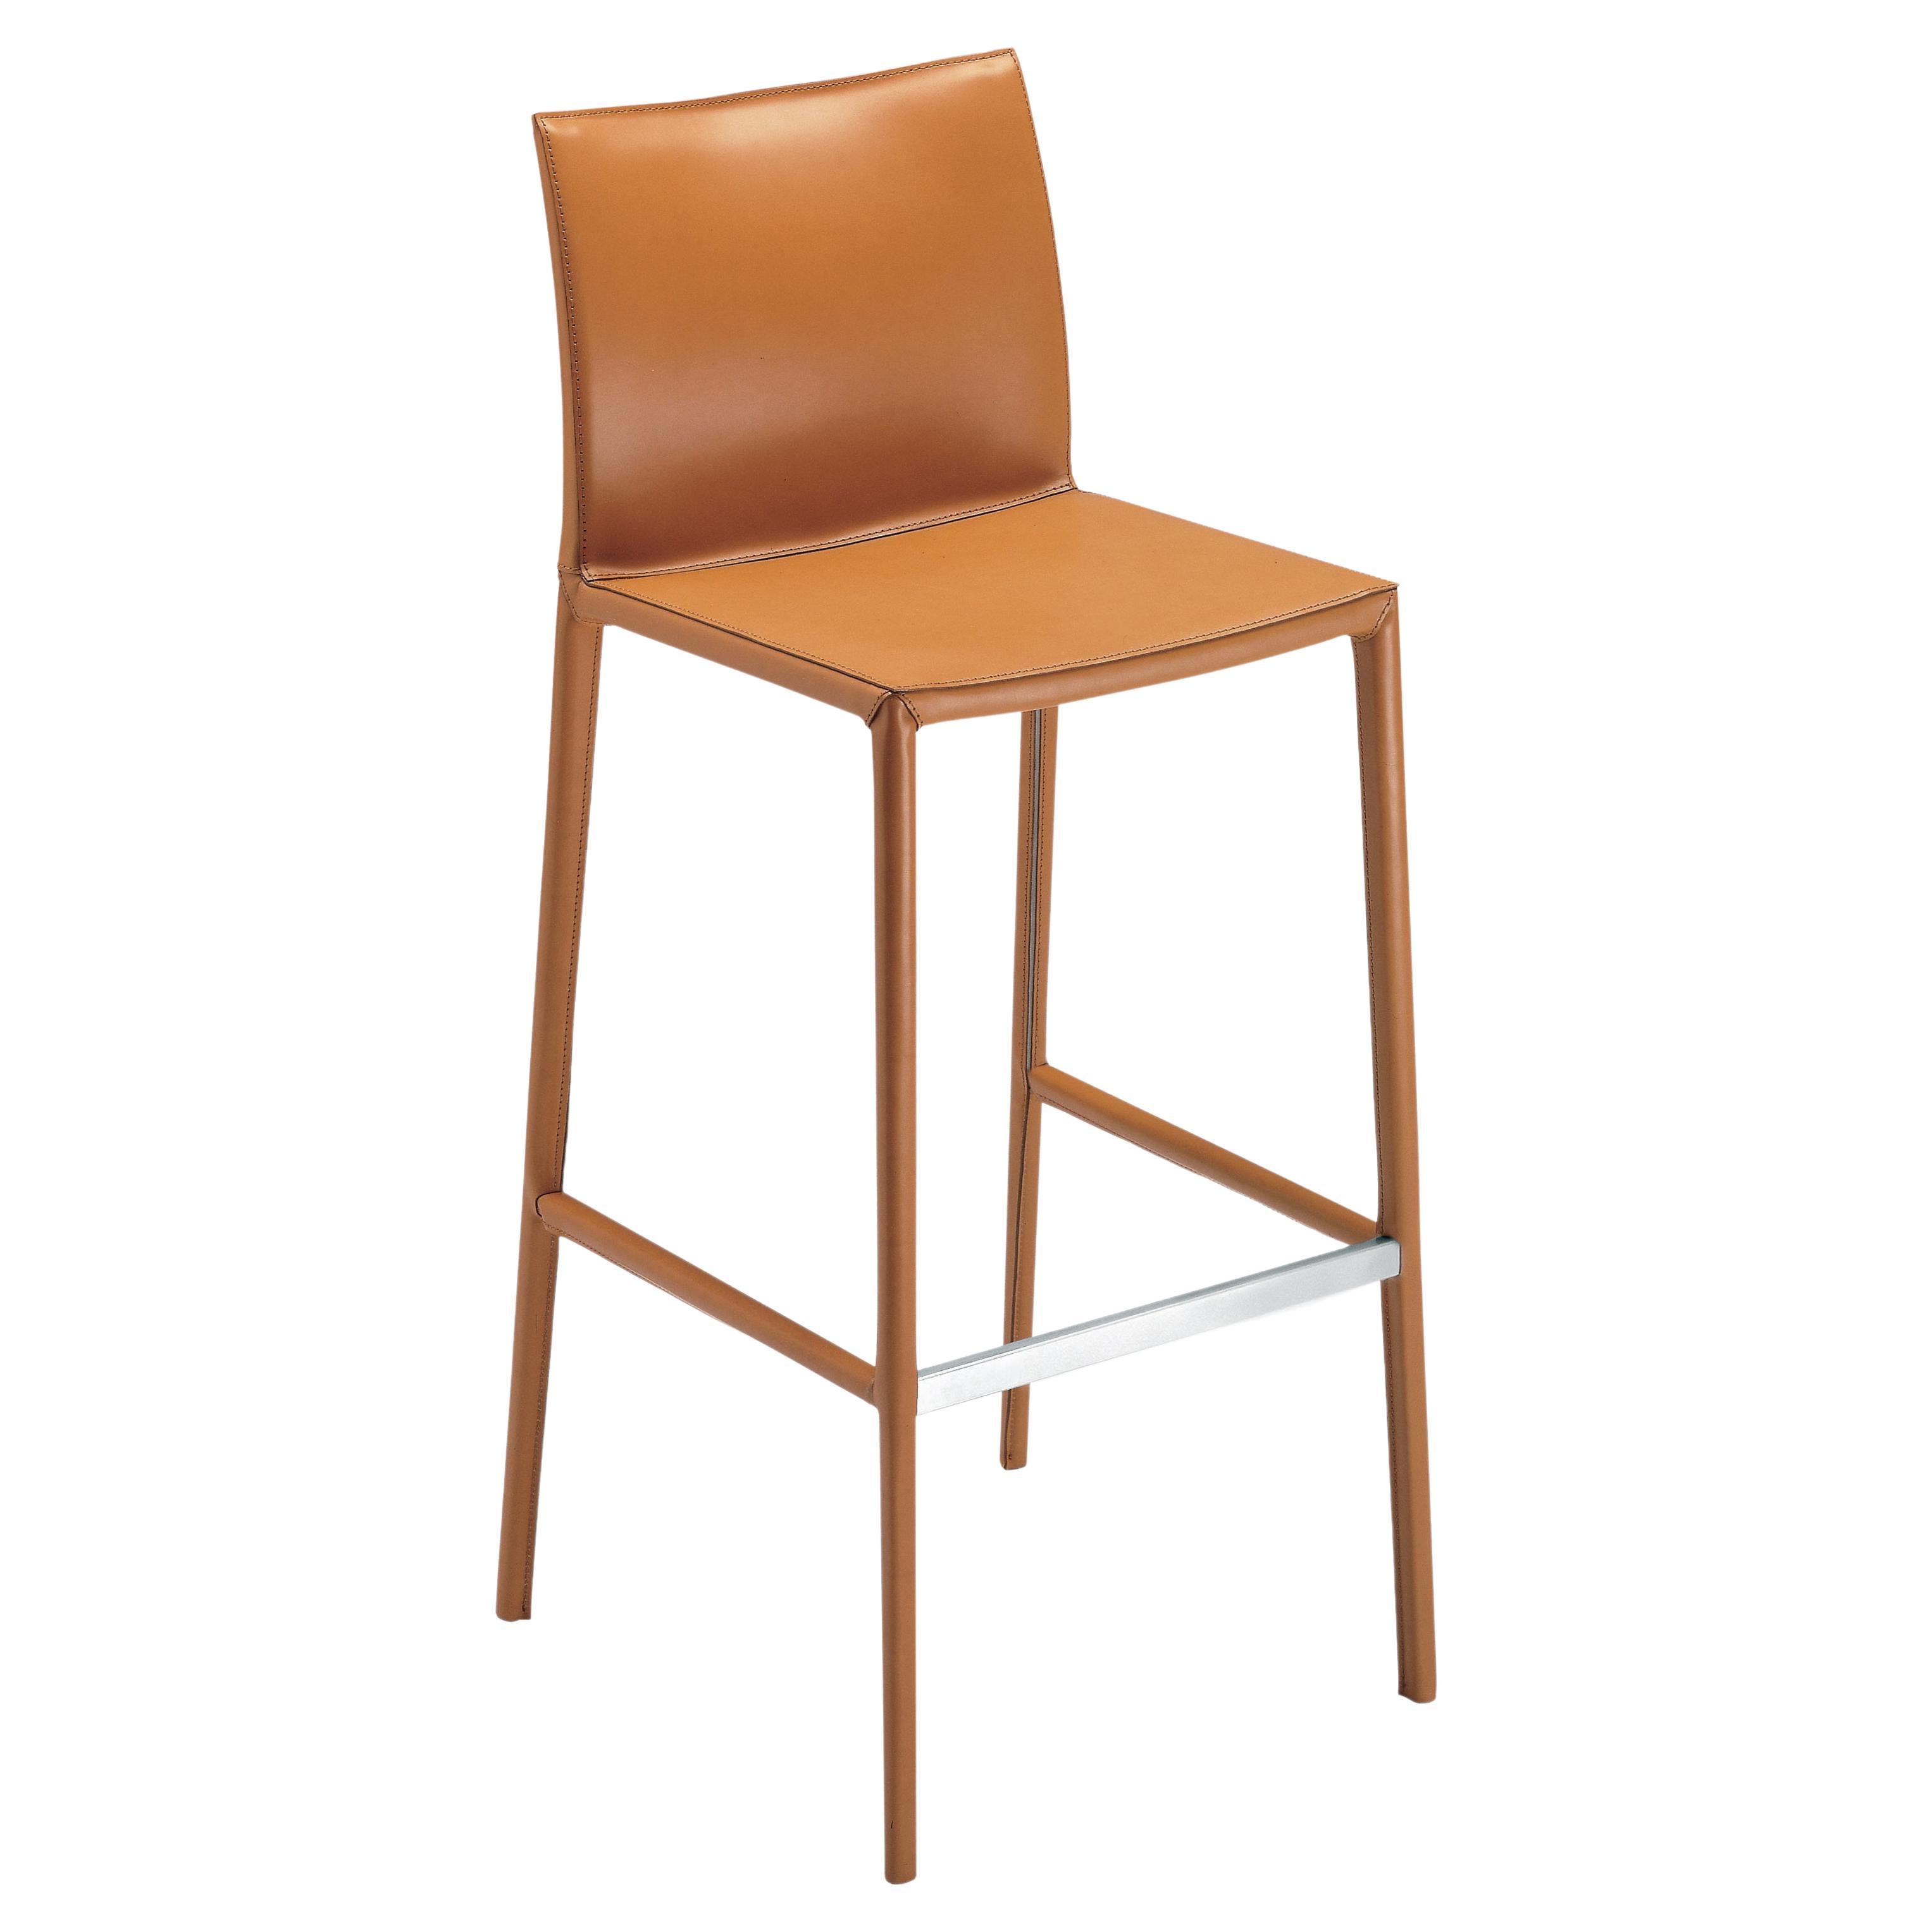 Zanotta Small Leo Stool in Brown Leather Upholstery and Aluminum Frame